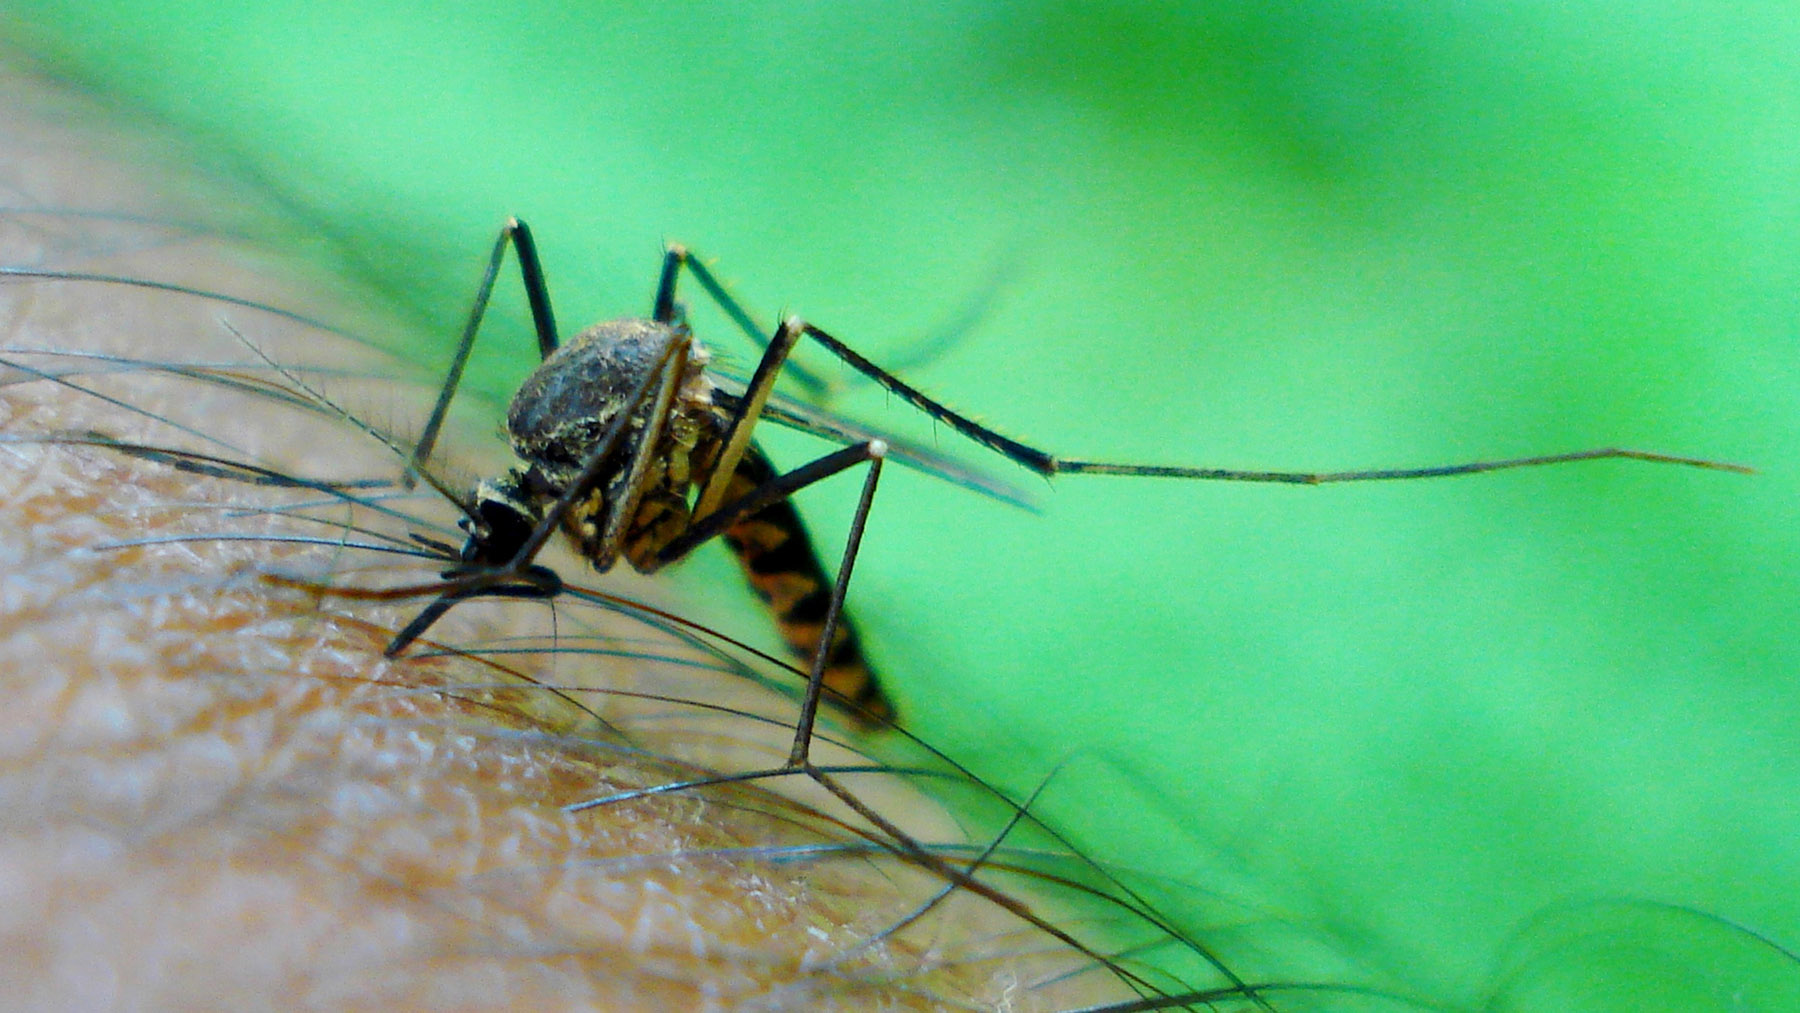 A close-up view of a garden mosquito on a person's arm.